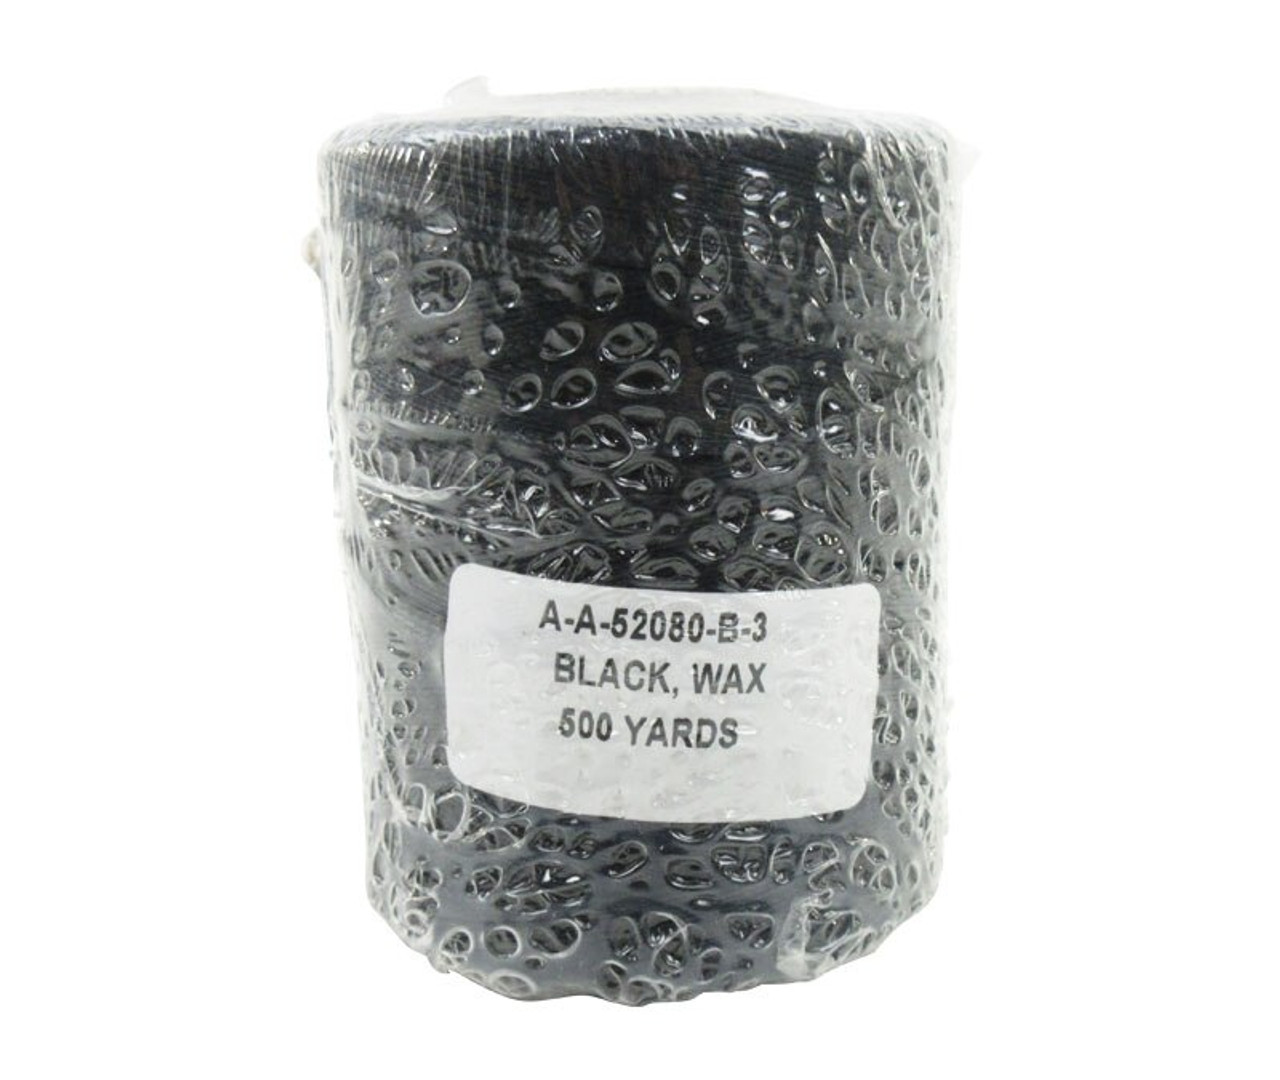 Military Specification A-A-52080-B-3 Black Nylon/Waxed Finish Tape, Lacing  & Tying Cord - 500 Yard Spool